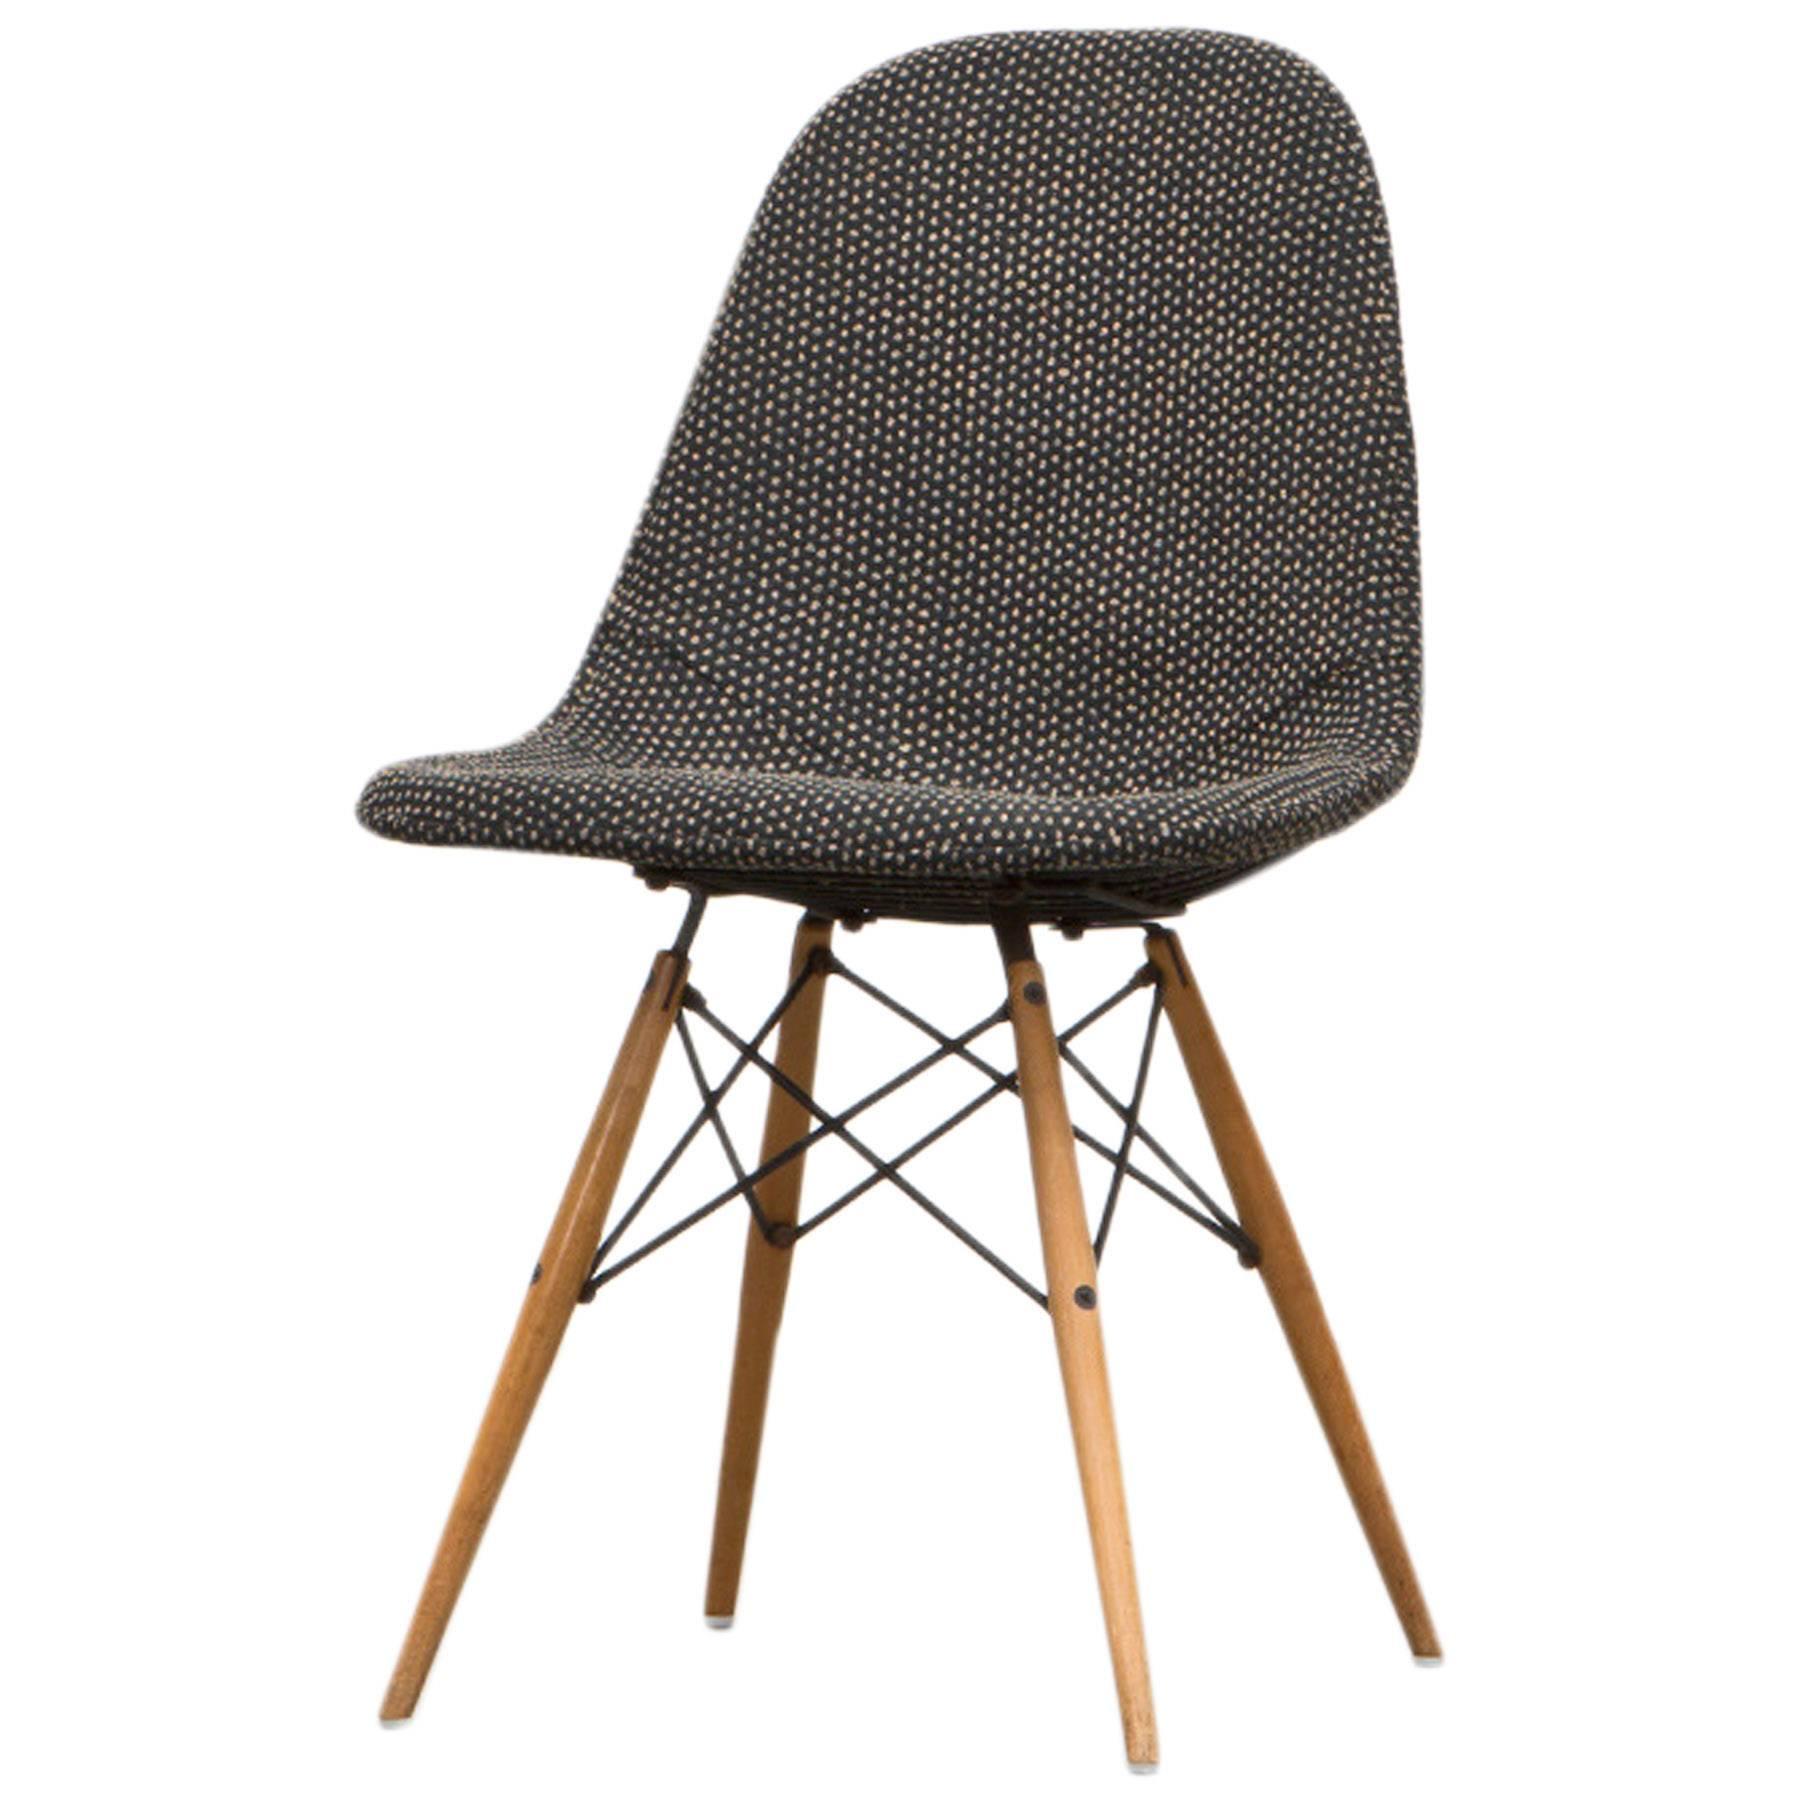 Charles & Ray Eames Chair with Alexander Girard fabric